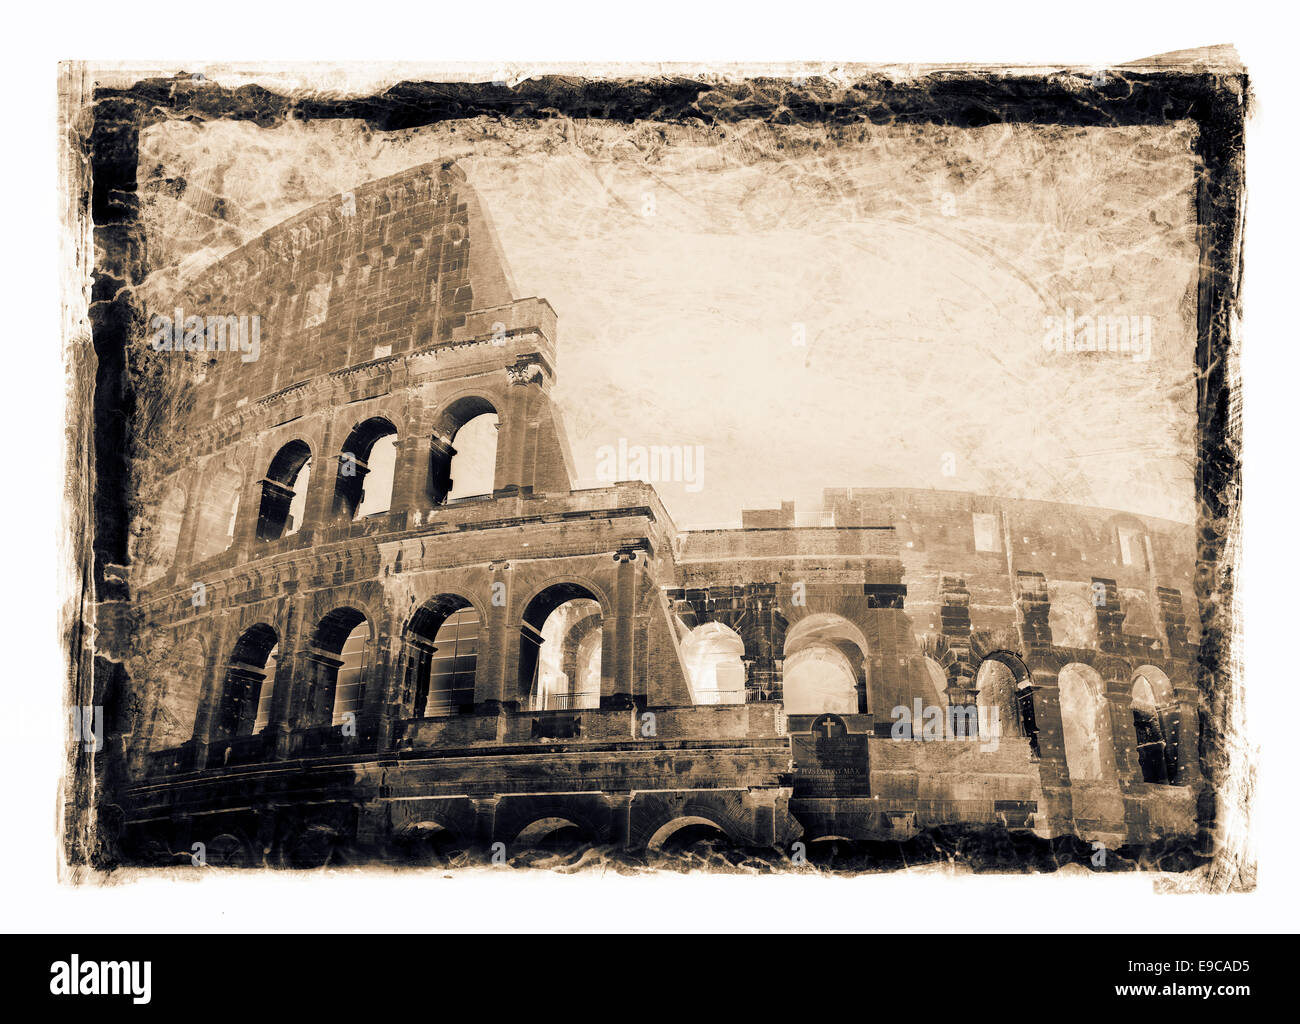 Grainy and gritty image of Colosseum, Rome, Italy. Stock Photo